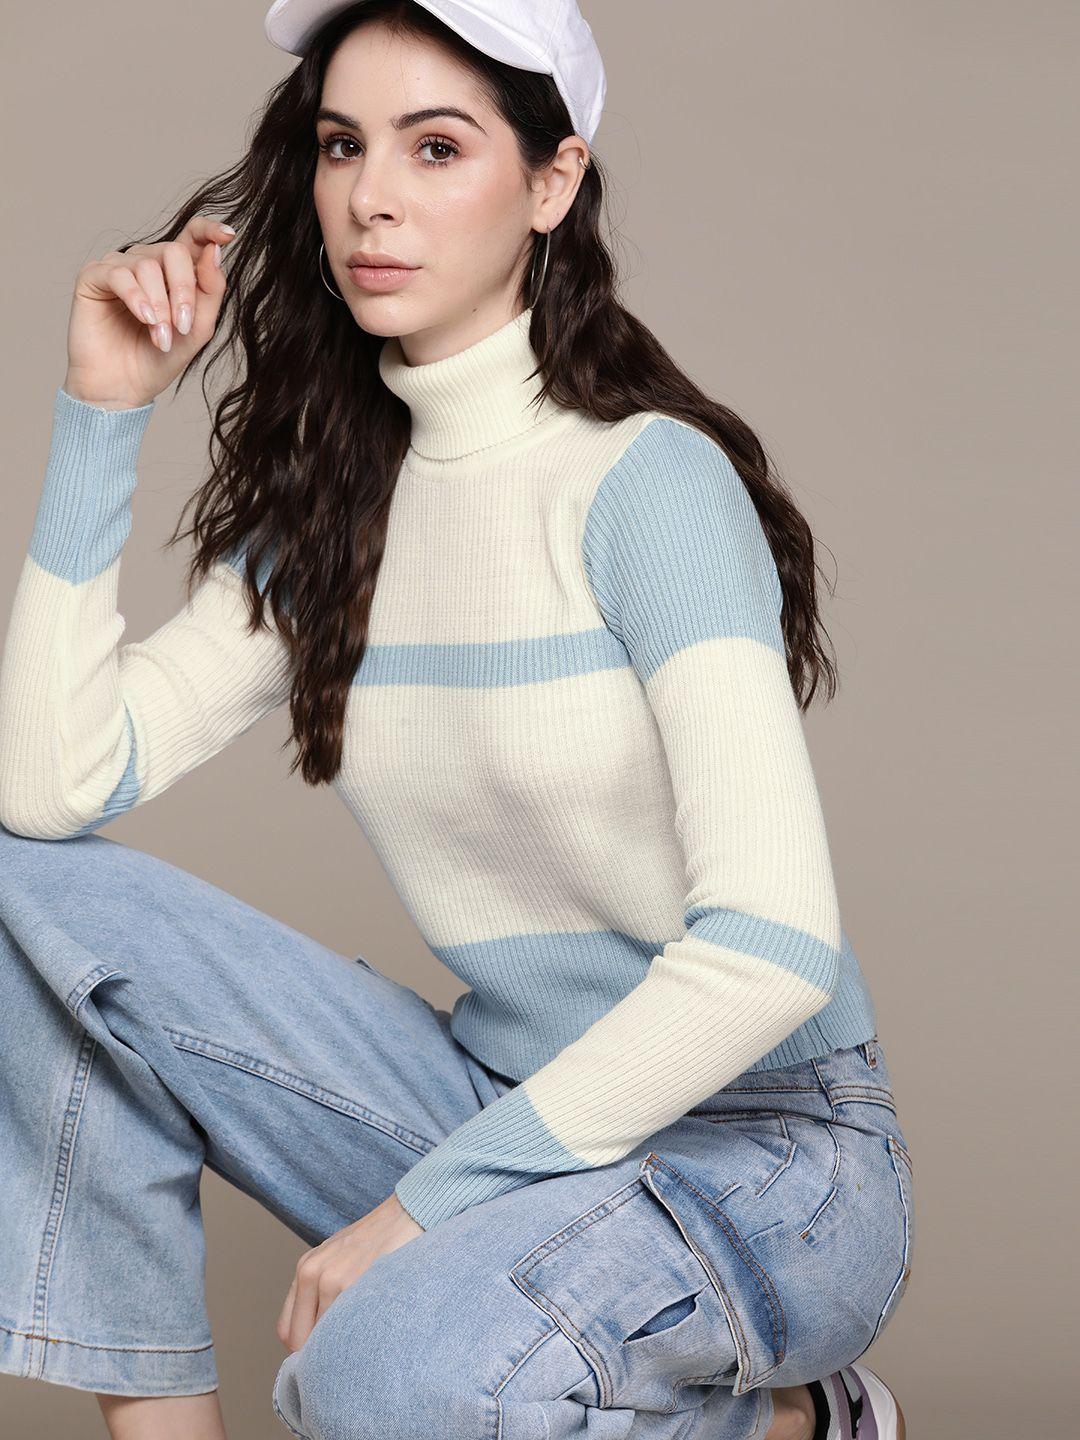 the-roadster-lifestyle-co.-slim-acrylic-striped-colourblocked-pullover